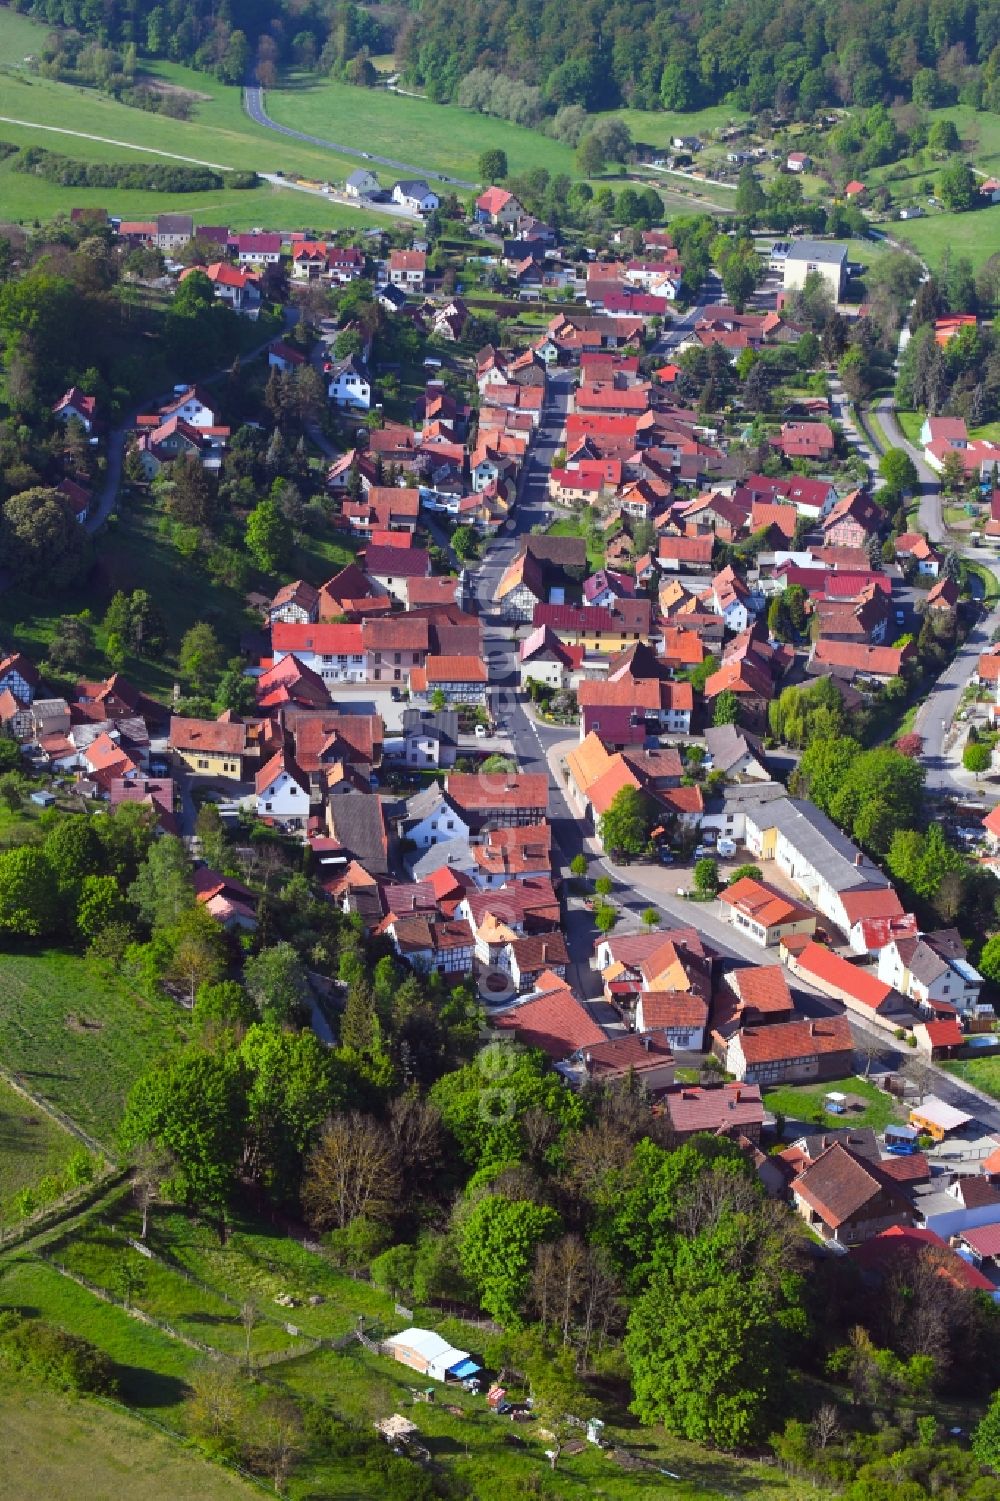 Aerial image Nazza - Location view of the streets and houses of residential areas in the valley landscape surrounded by mountains in Nazza in the state Thuringia, Germany